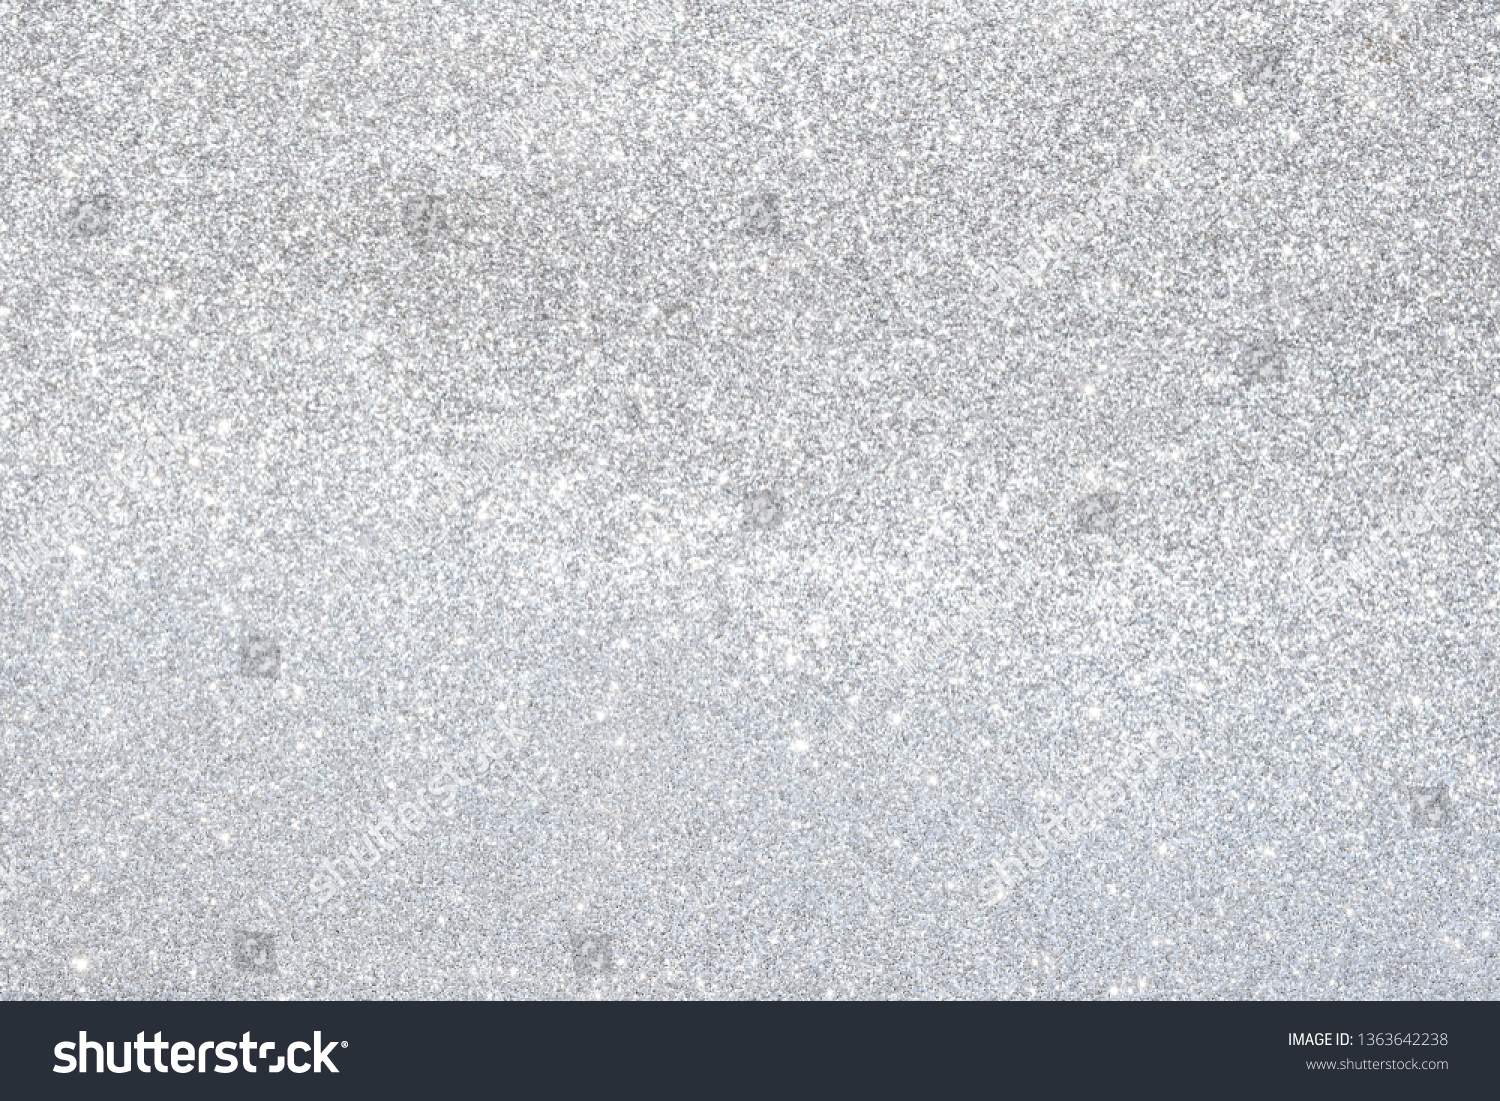 sparkle of silver glitter abstract background #1363642238